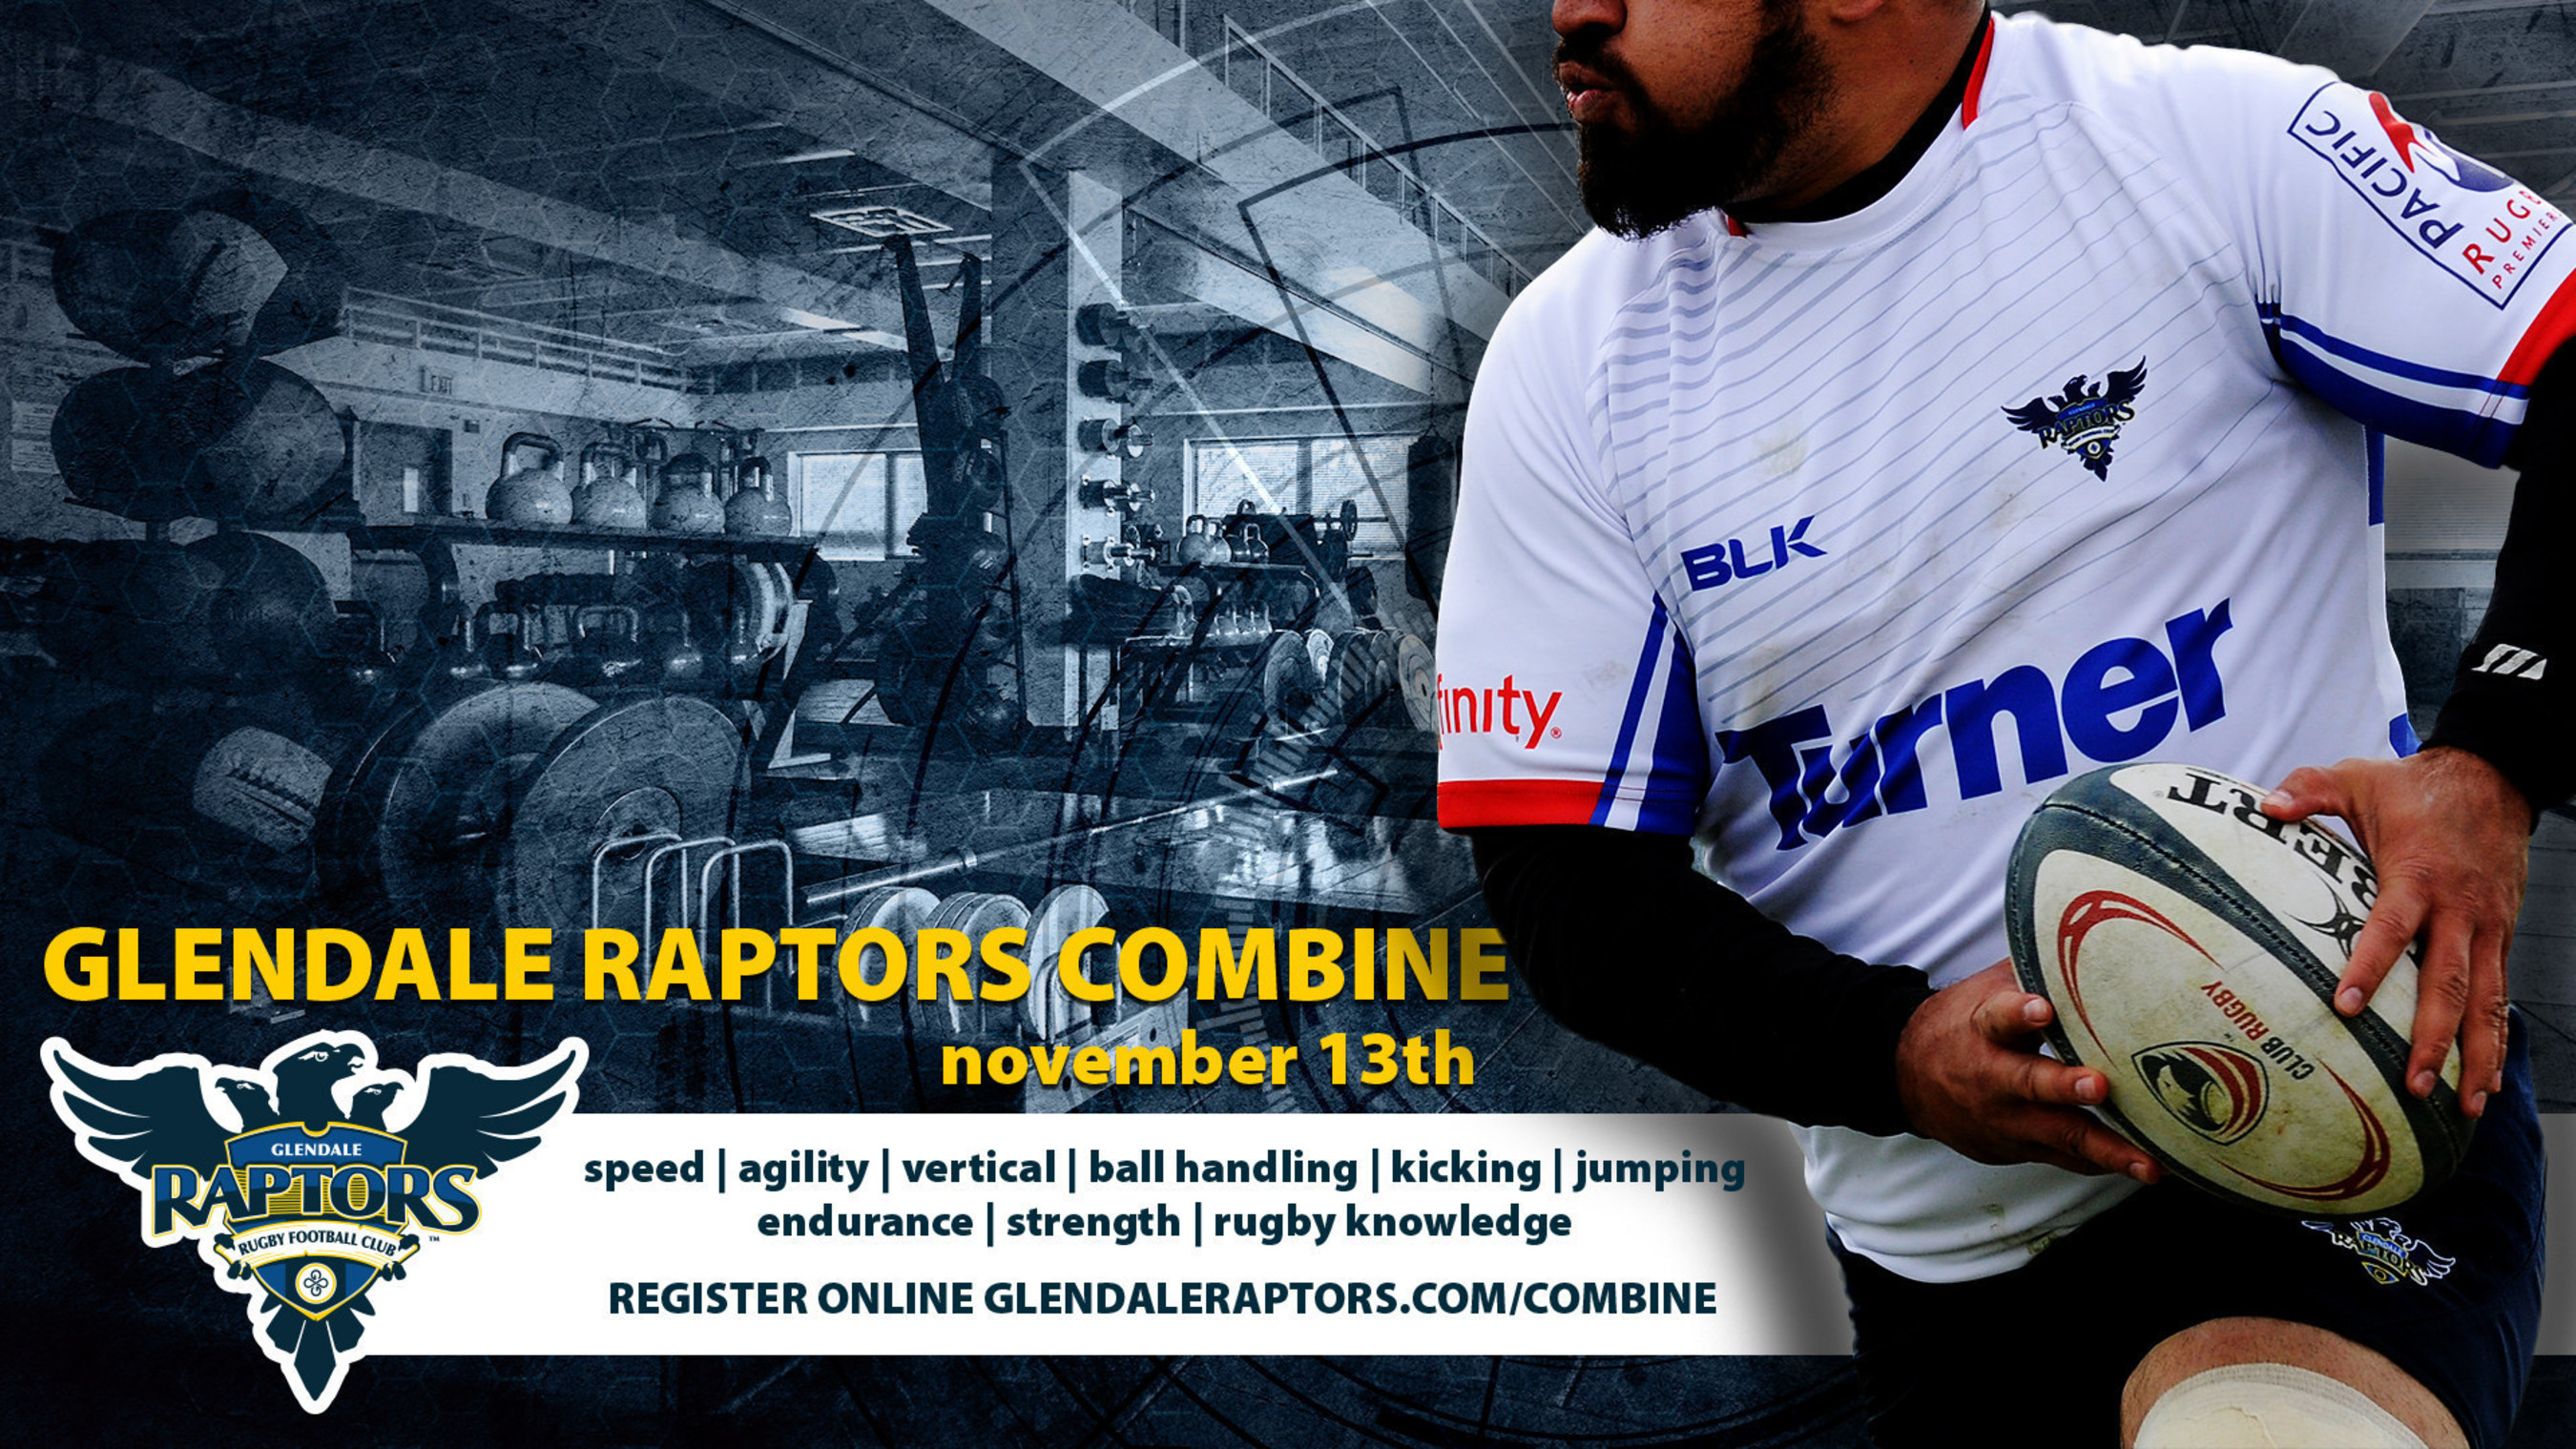 Rugby players 18 and older will have an opportunity to showcase their skills and athleticism as Glendale Raptors Rugby takes its first steps into the professional rugby arena November 13, 2016 at Infinity Park in Glendale, CO.